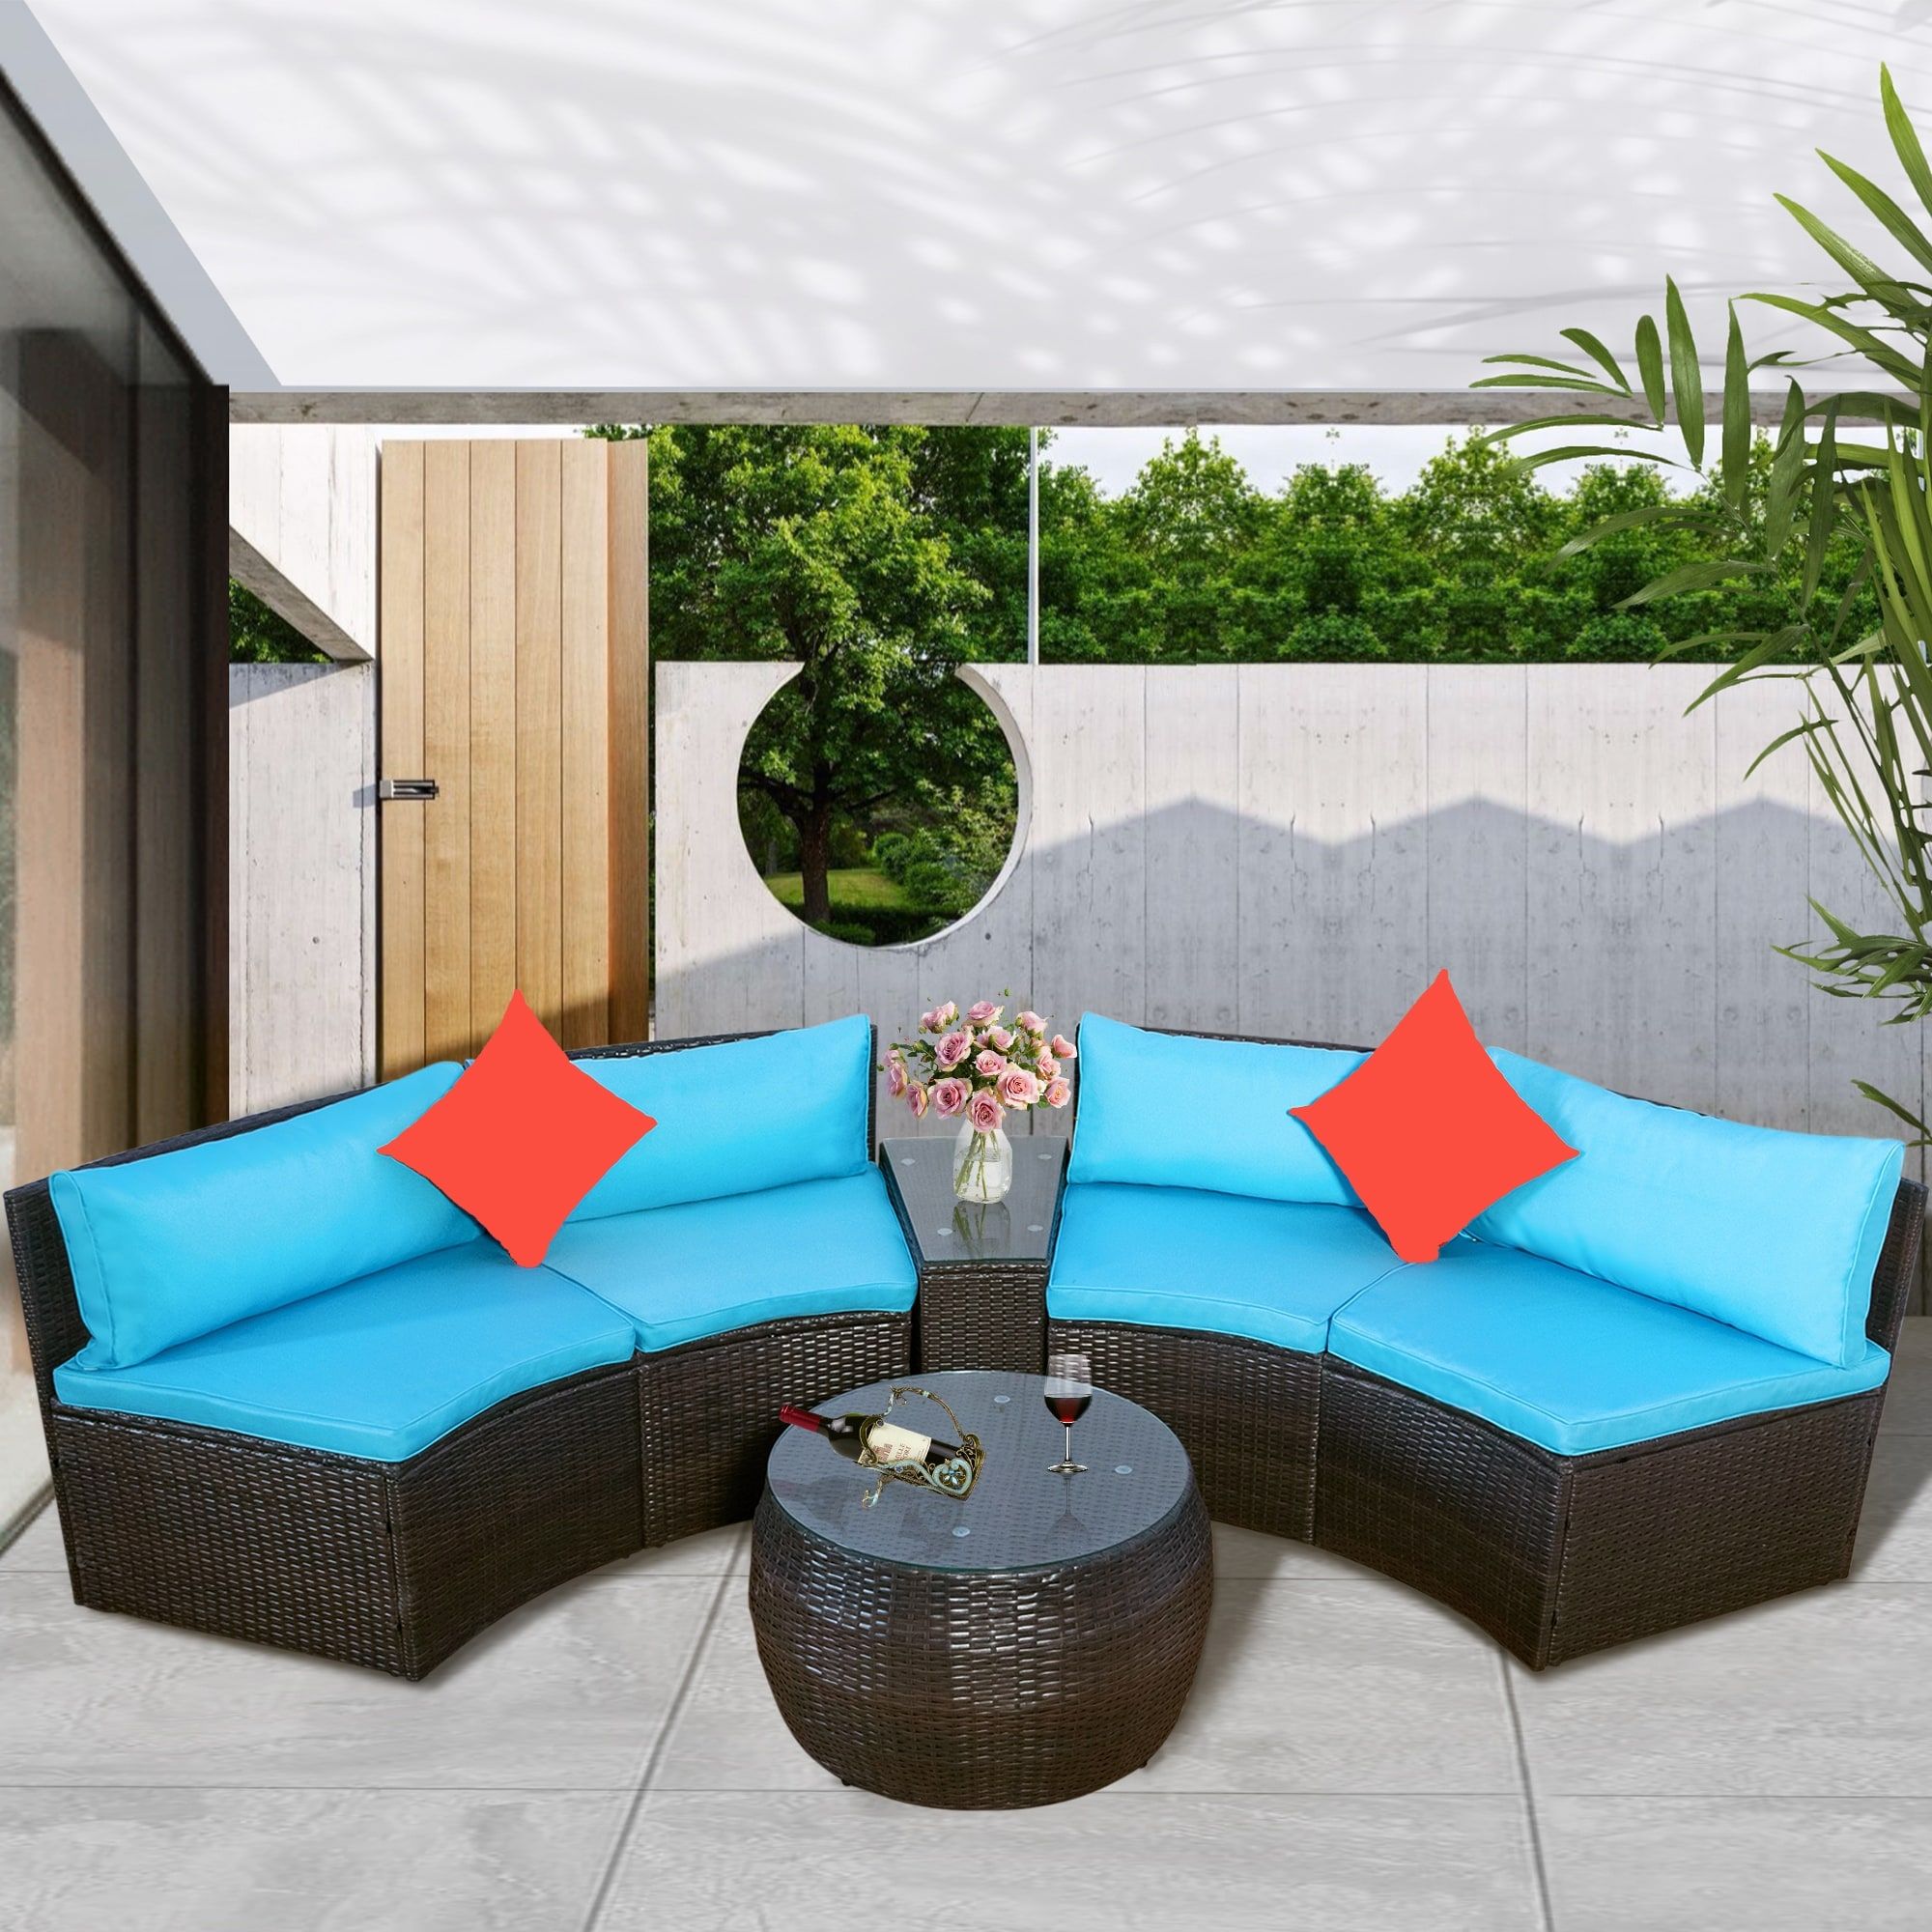 4 Piece Rattan Outdoor Patio Furniture Sofa Sets With Round Coffee Table,  Half Moon Sectional Sofa, With Cushion And Pillow – Bed Bath & Beyond –  37425352 With Outdoor Half Round Coffee Tables (View 10 of 15)